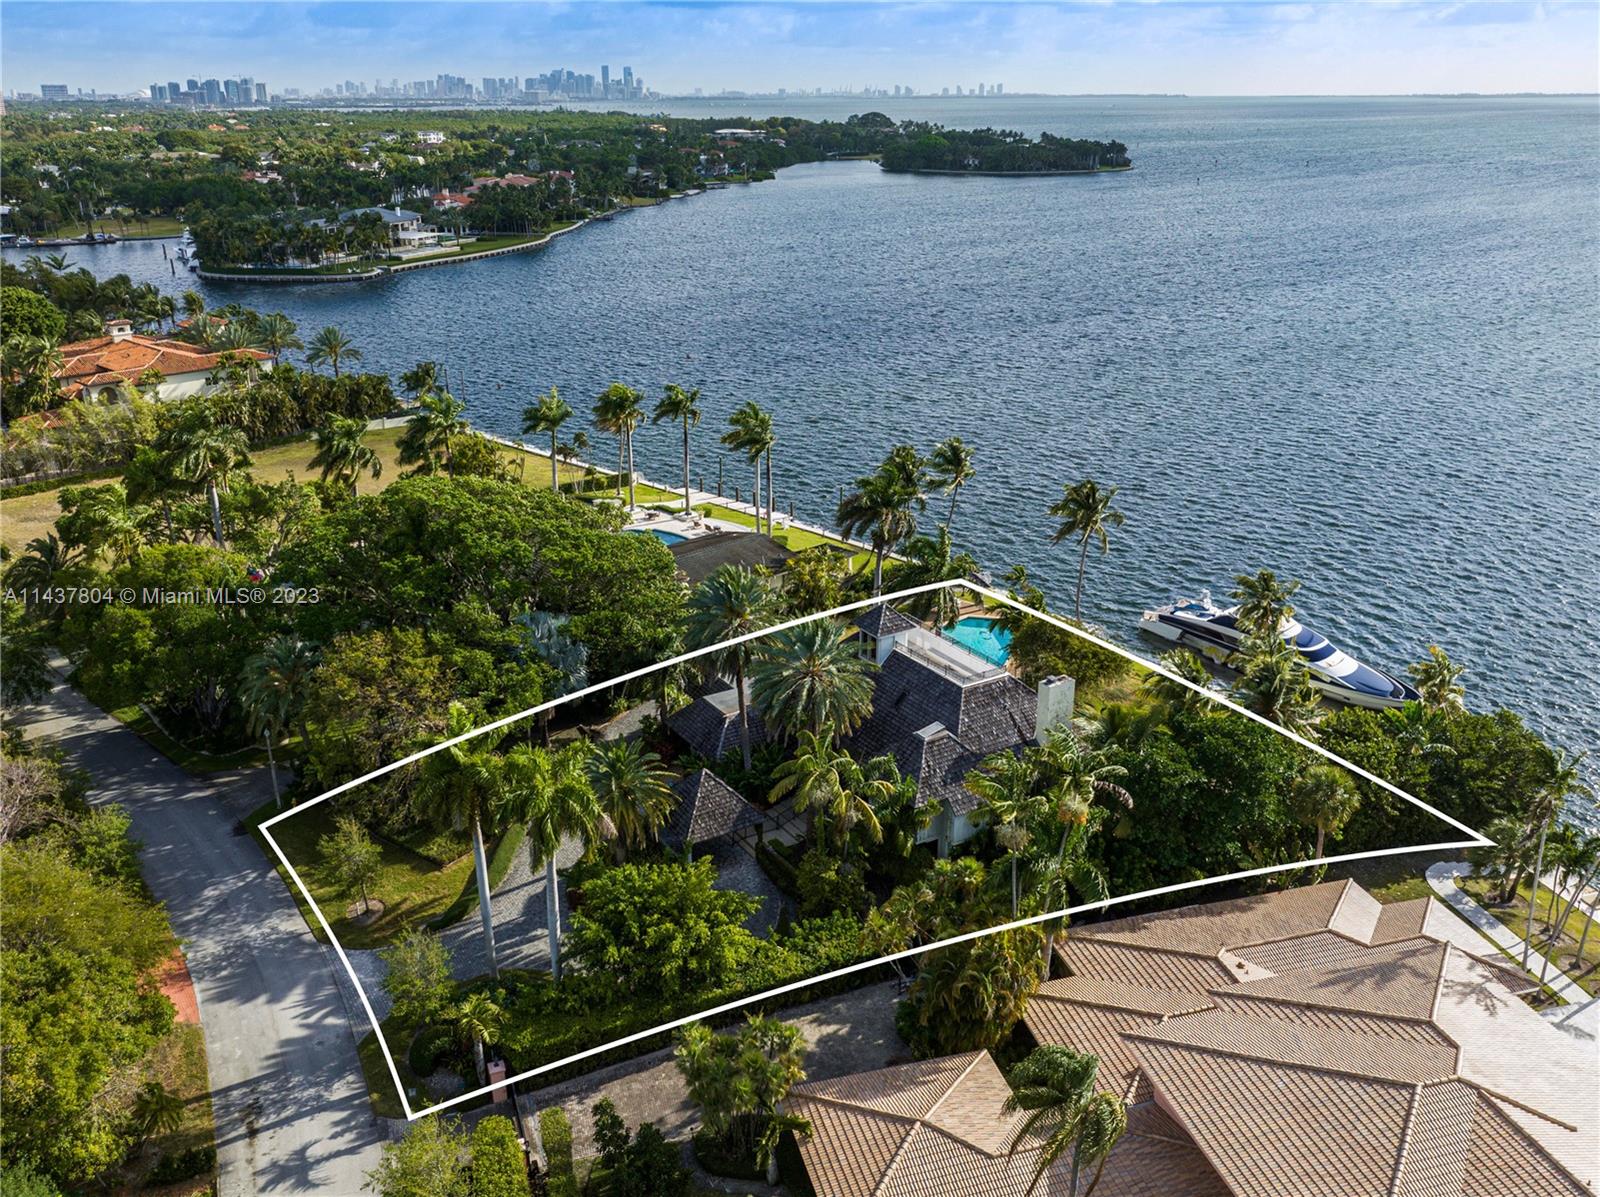 An exceptional opportunity to acquire a bayfront property with direct ocean access in the exclusive and gated Old Cutler Bay community. Boasting sweeping views of Biscayne Bay, the expansive 31,130 SF lot features an impressive 170 feet of waterfront, capable of handling 100+ foot vessels and a boatlift with 20-30,000lb capacity. Build your dream home on one of the last remaining lots available on the open bay. In close proximity to Miami's finest private and public schools, restaurants, shopping, and entertainment. Also listed as Residential Land.